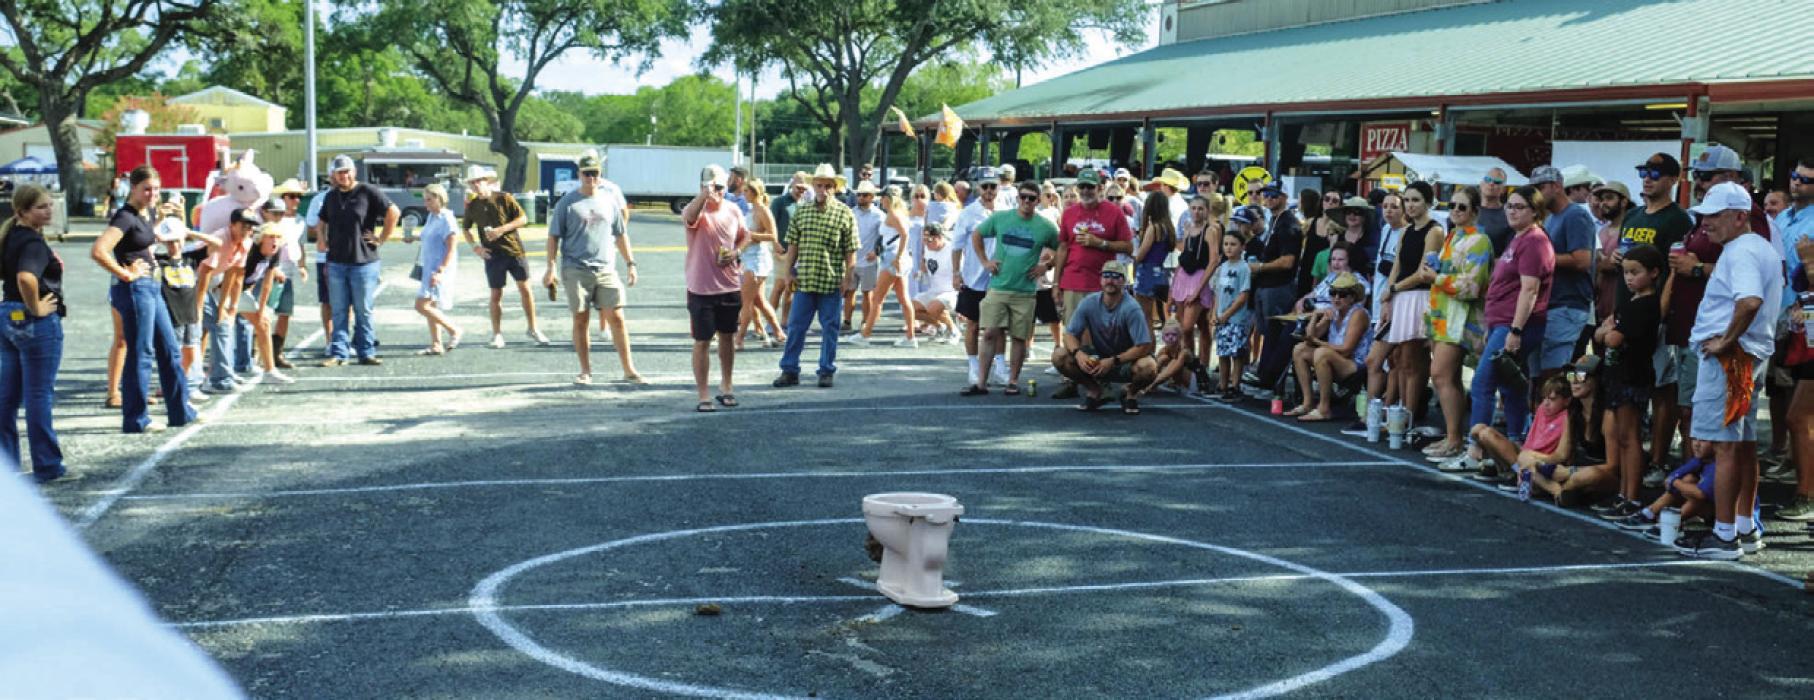 A crowd gathers around to watch the cow chip pitching contest at the Schulenburg Festival on Saturday, Aug. 5. The contest, sponsored by the Schulenburg Young Farmers, involves pitching a lump of cow manure into a toilet. Photo by Andy Behlen